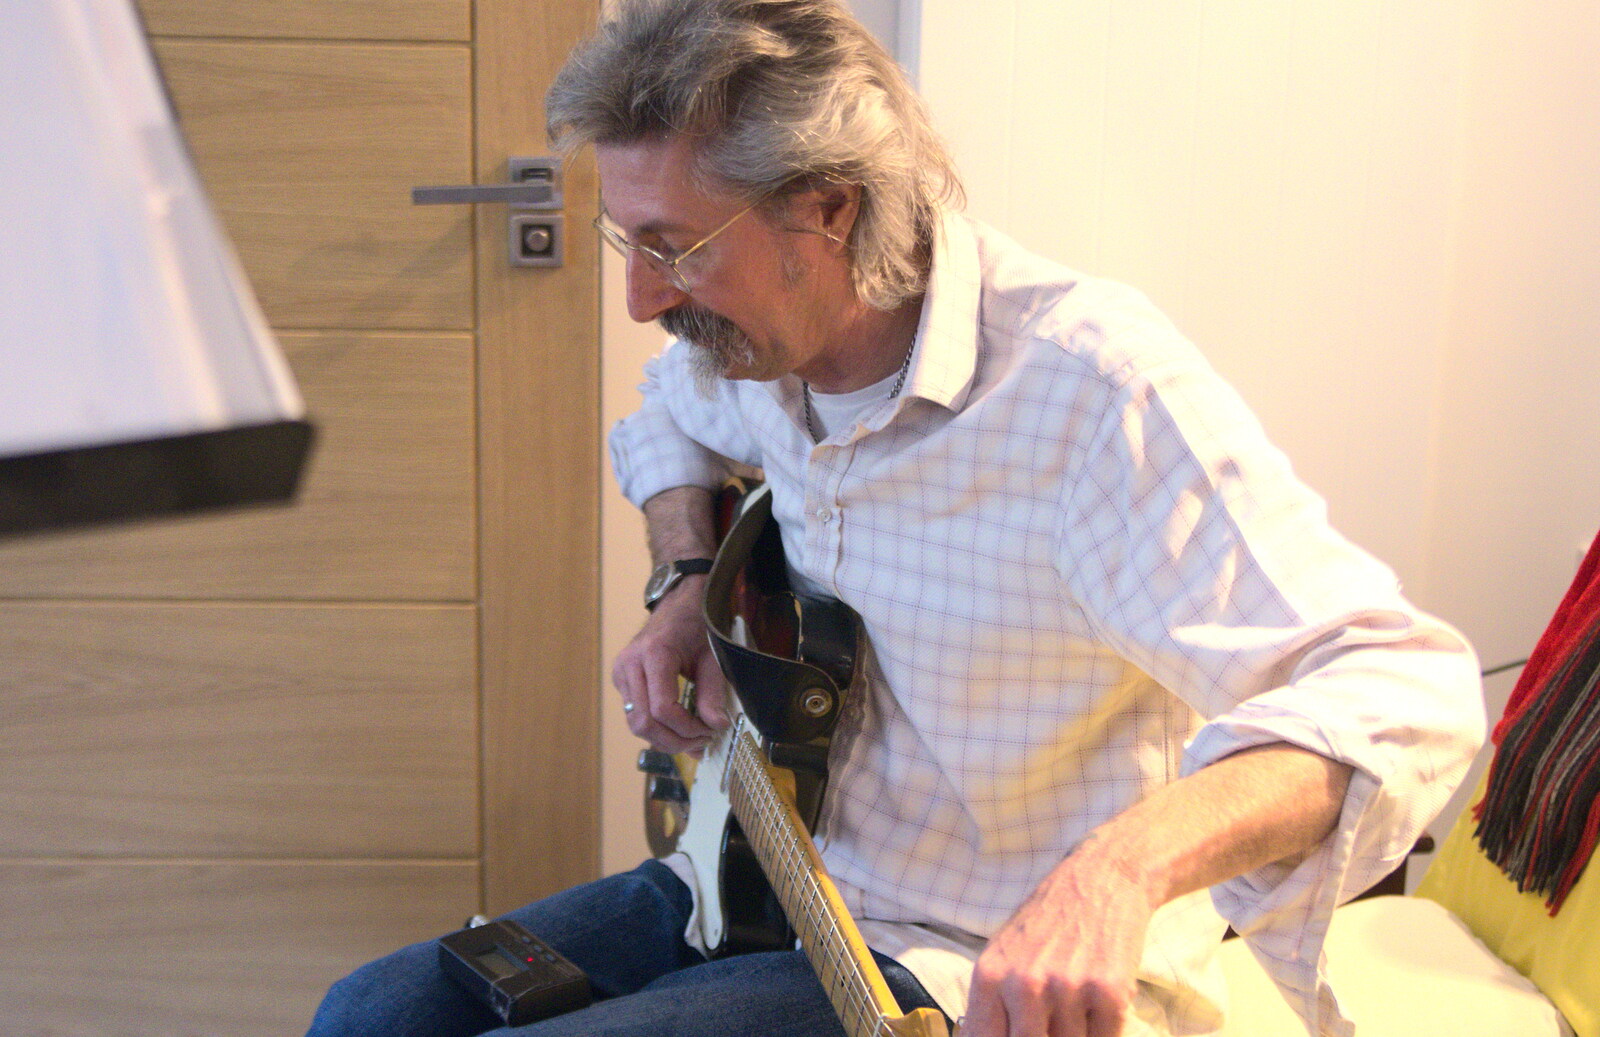 Tuning up the Telecaster from The BBs do a Recording, Hethel, Norfolk - 18th January 2015